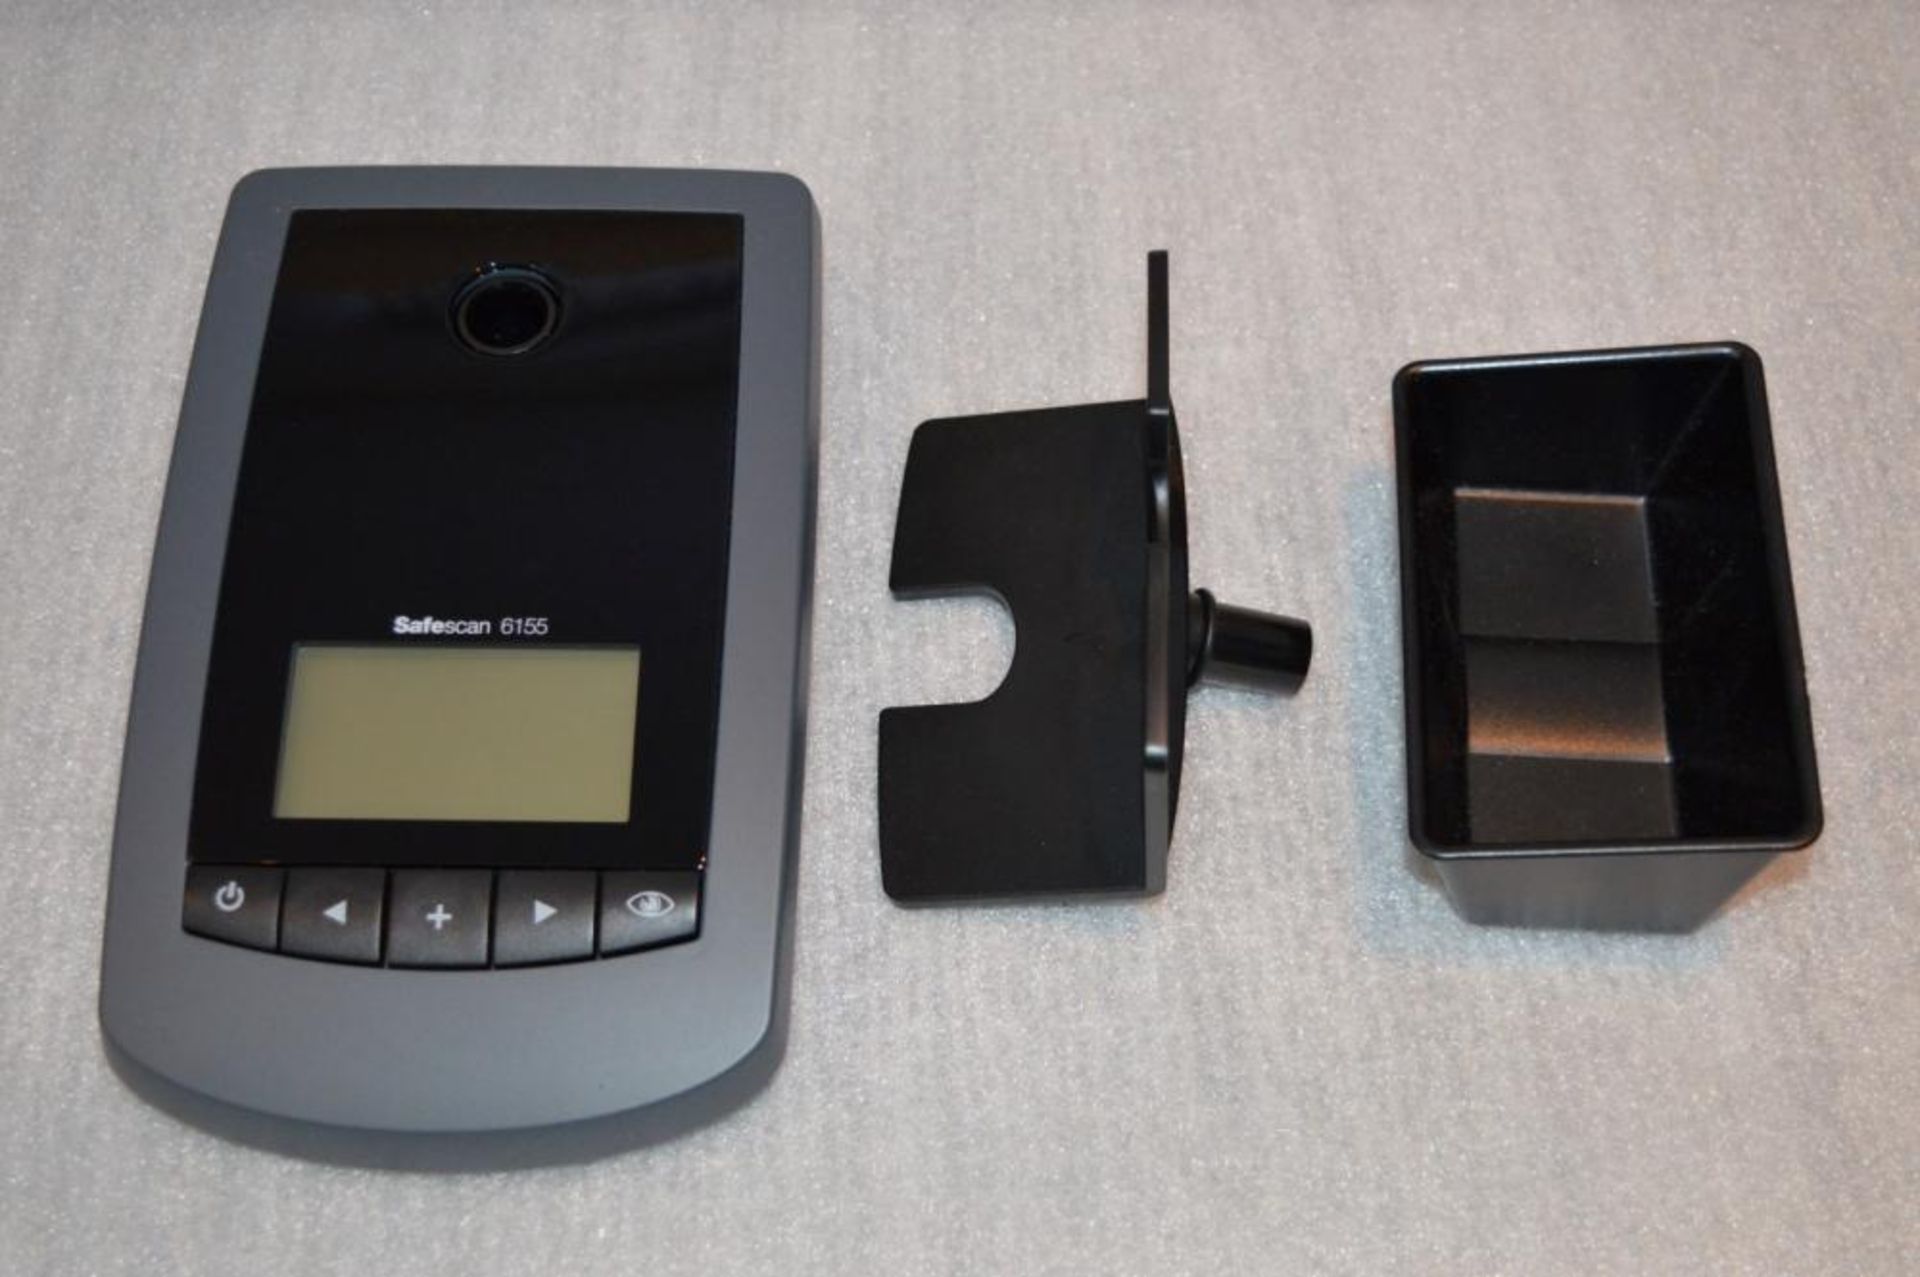 1 x SafeScan 6155 Coin and Bank Note Counter - Includes Coin and Note Trays, Box, Instructions and B - Image 6 of 10